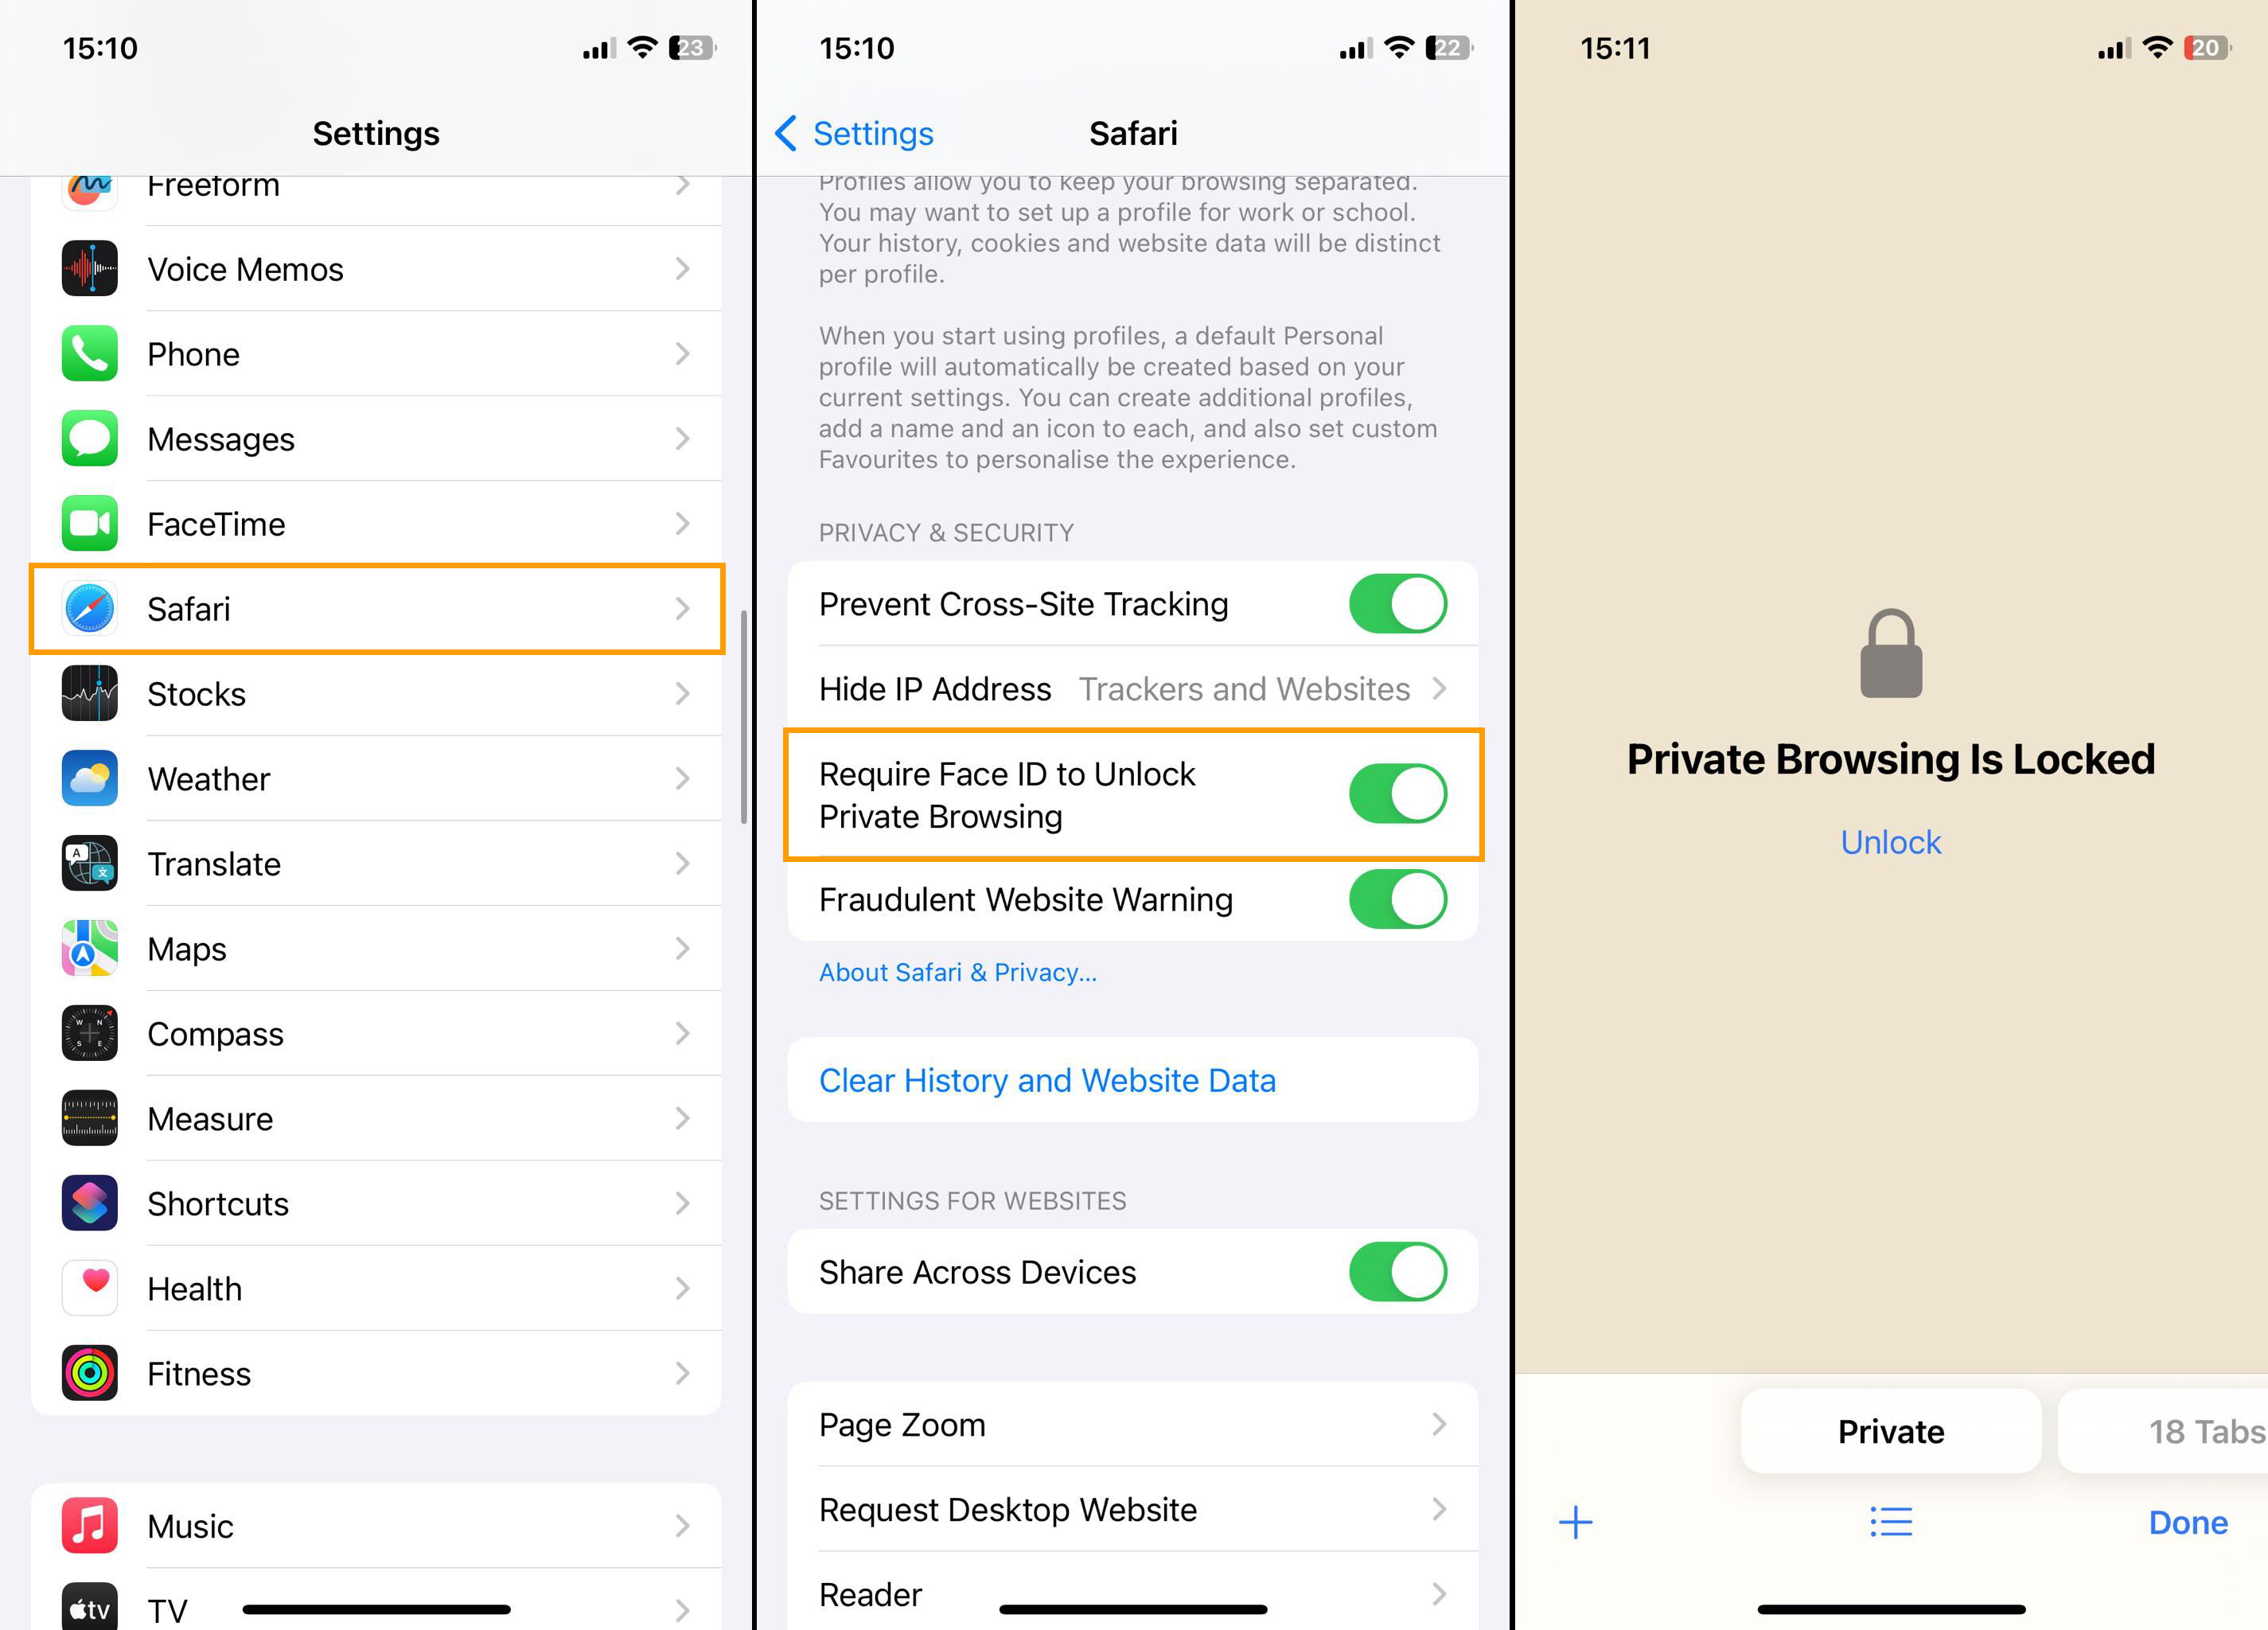 How to Block Private Browsing in Safari with Face ID